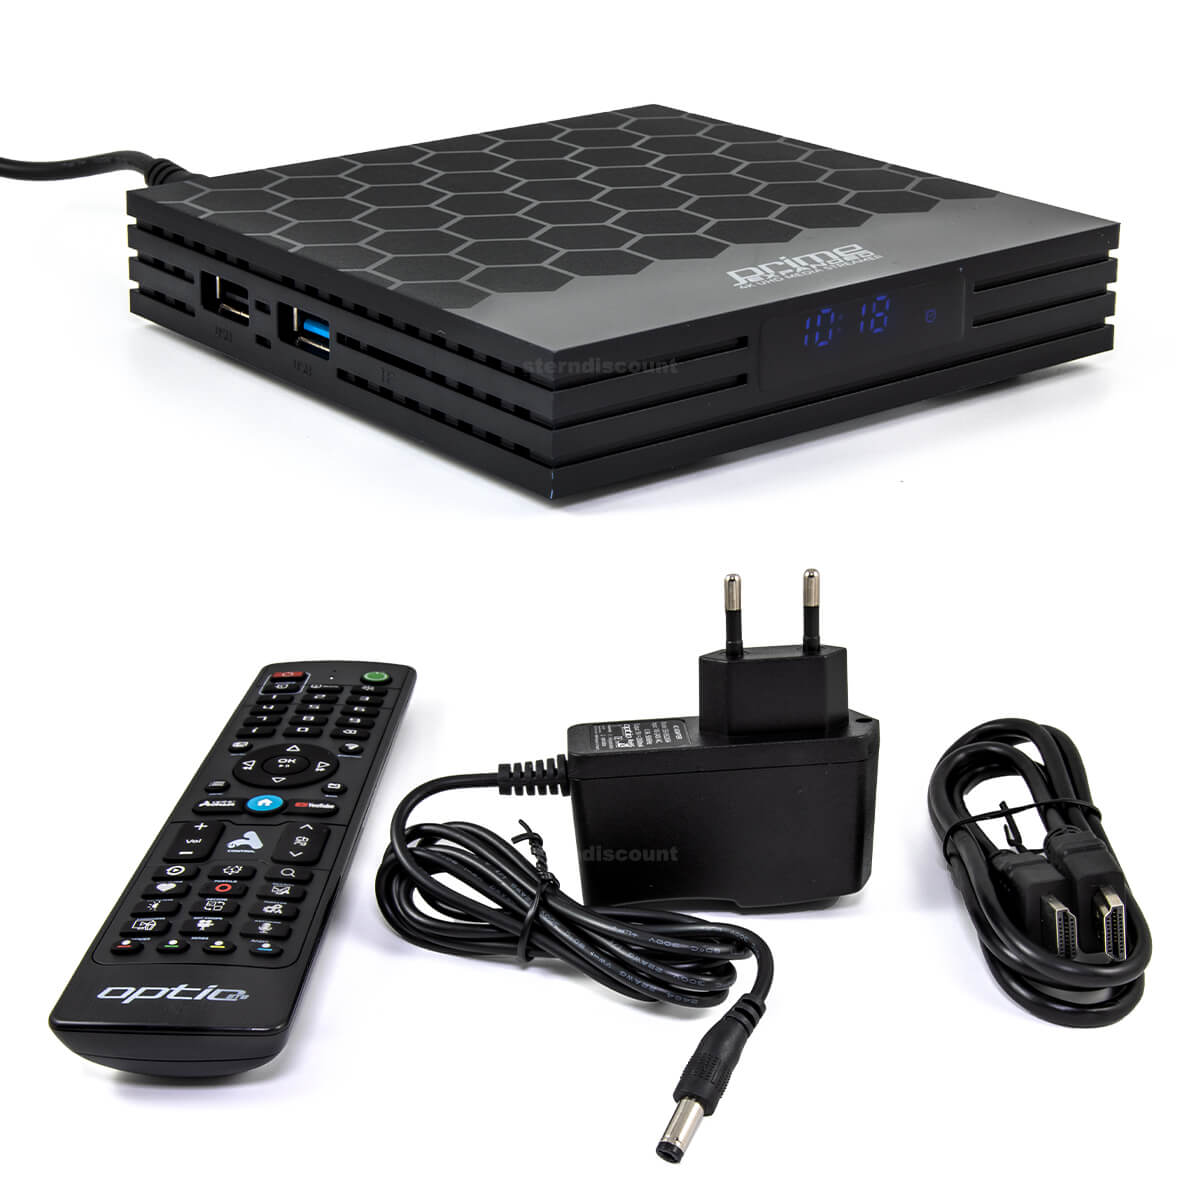 Optic-prime-expanded-android-iptv-box